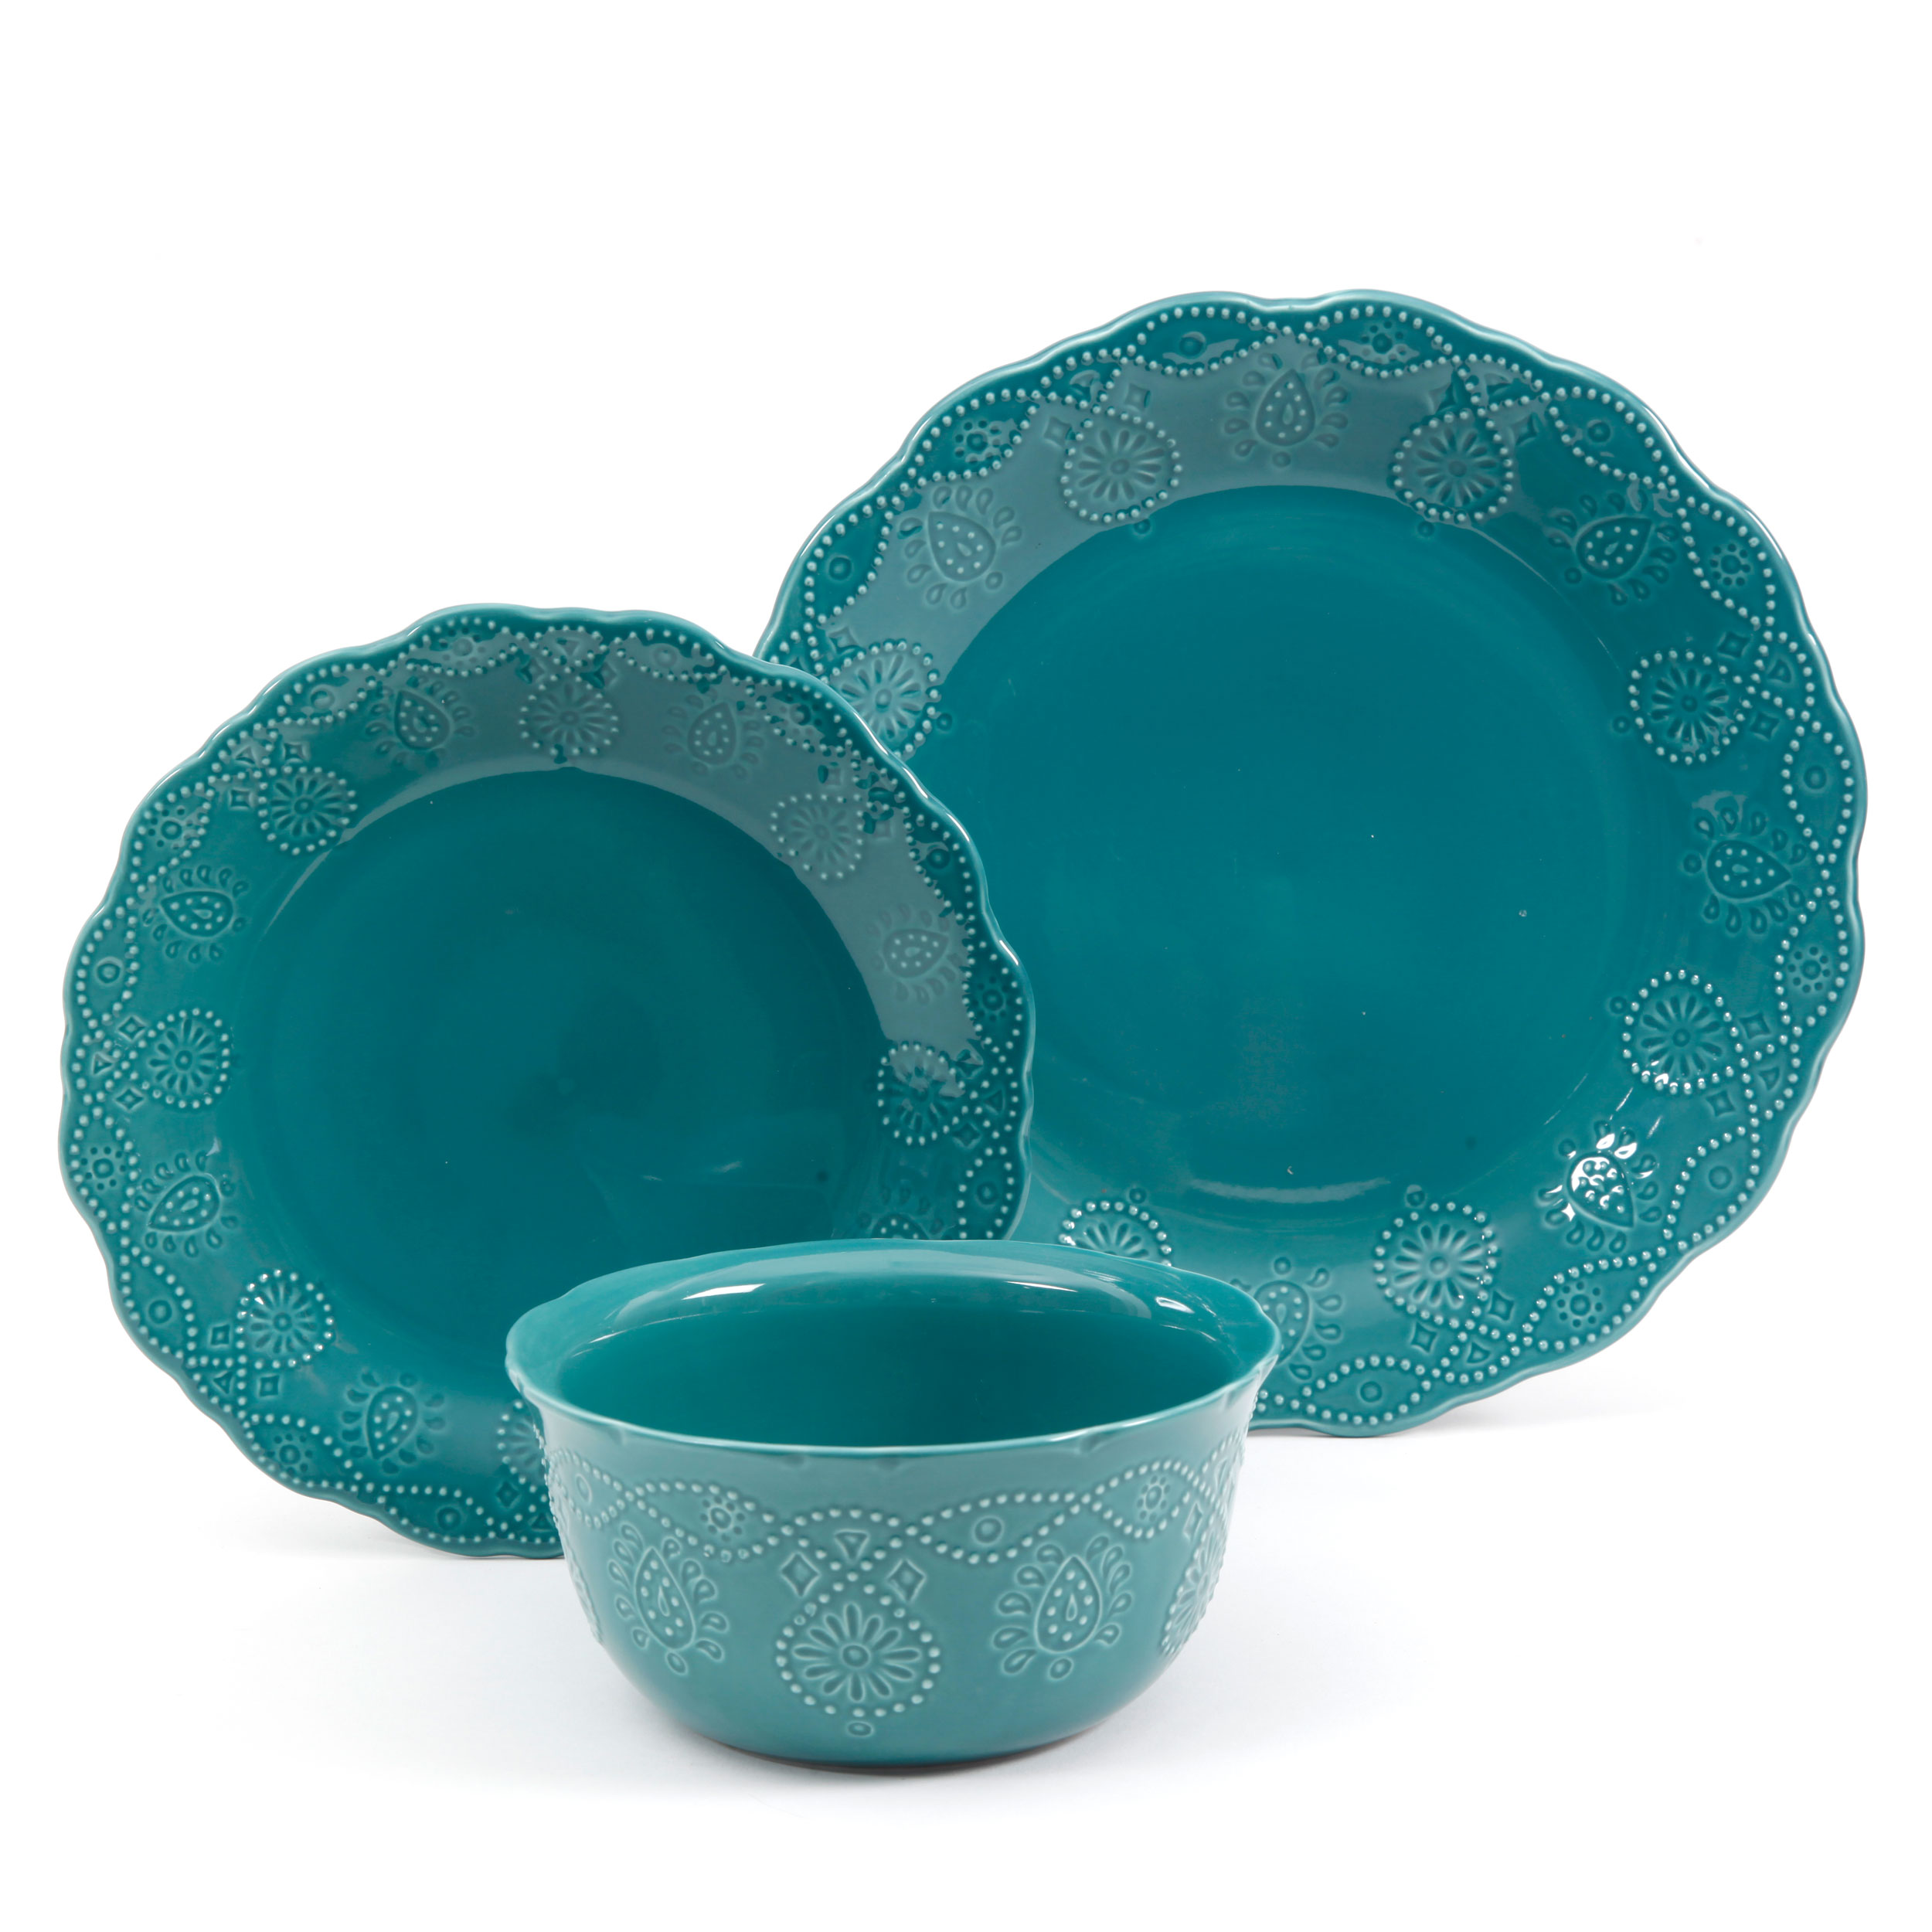 The Pioneer Woman Cowgirl Lace 12-Piece Dinnerware Set, Teal - image 5 of 7